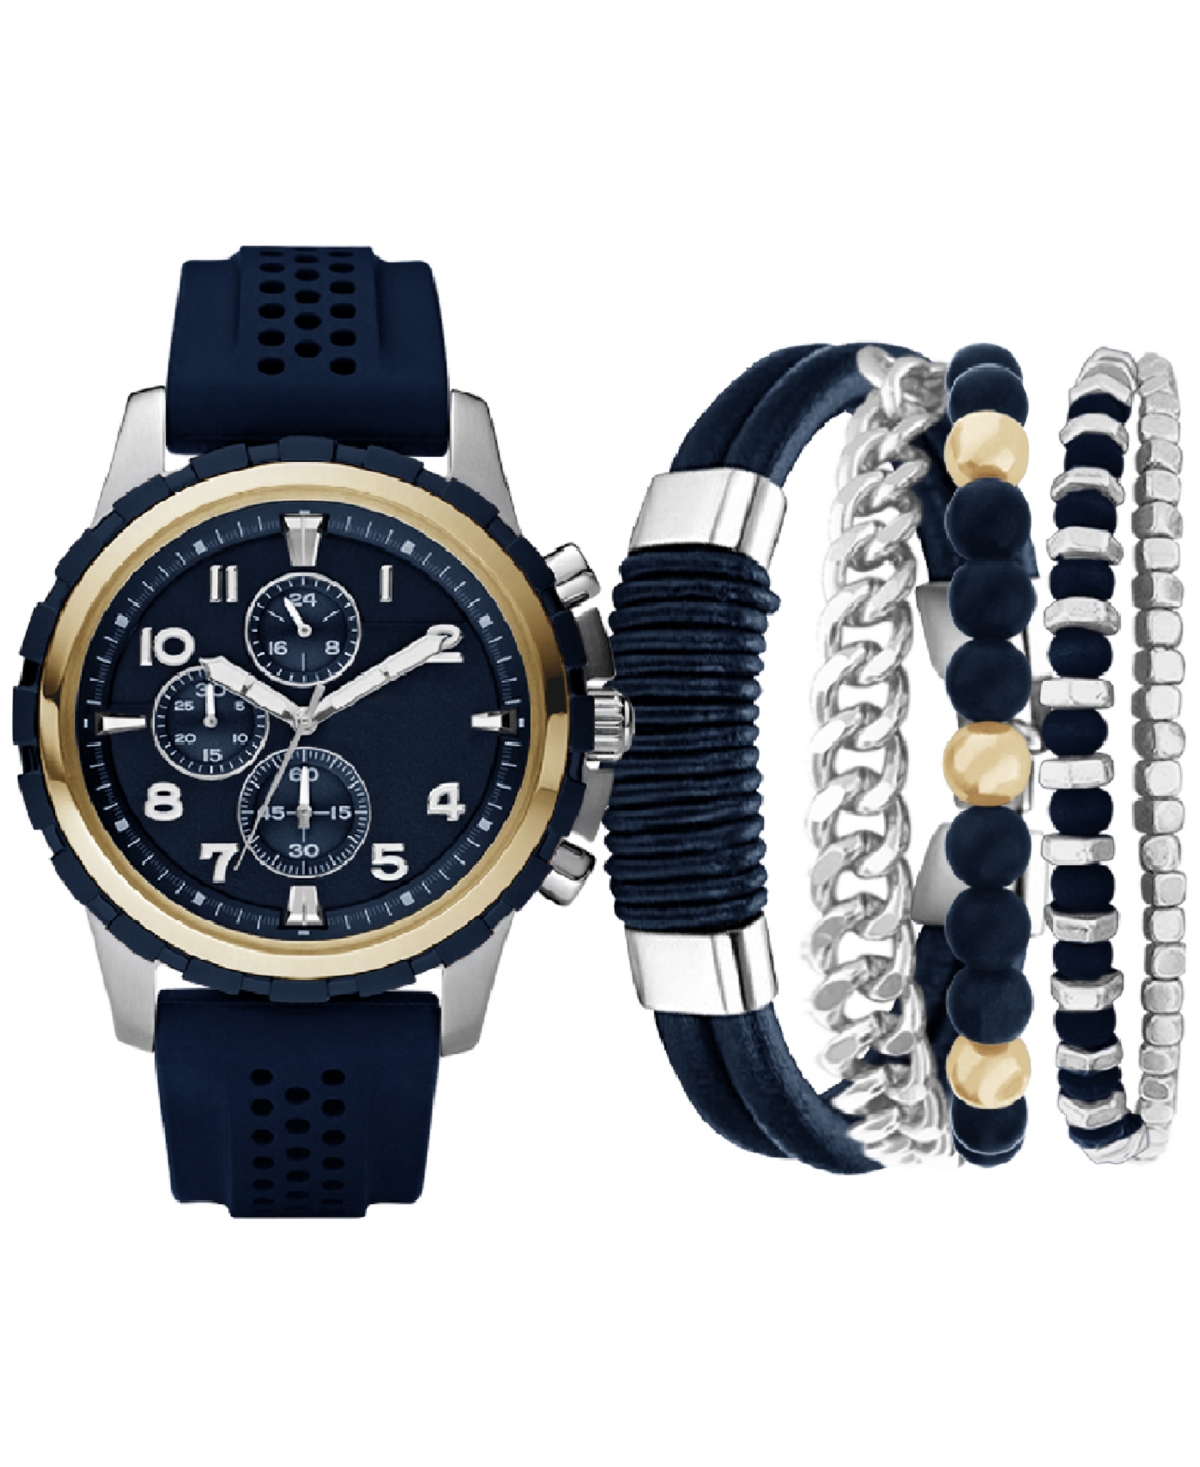 Men's Navy Perforated Silicone Strap Watch 45mm Gift Set - Black